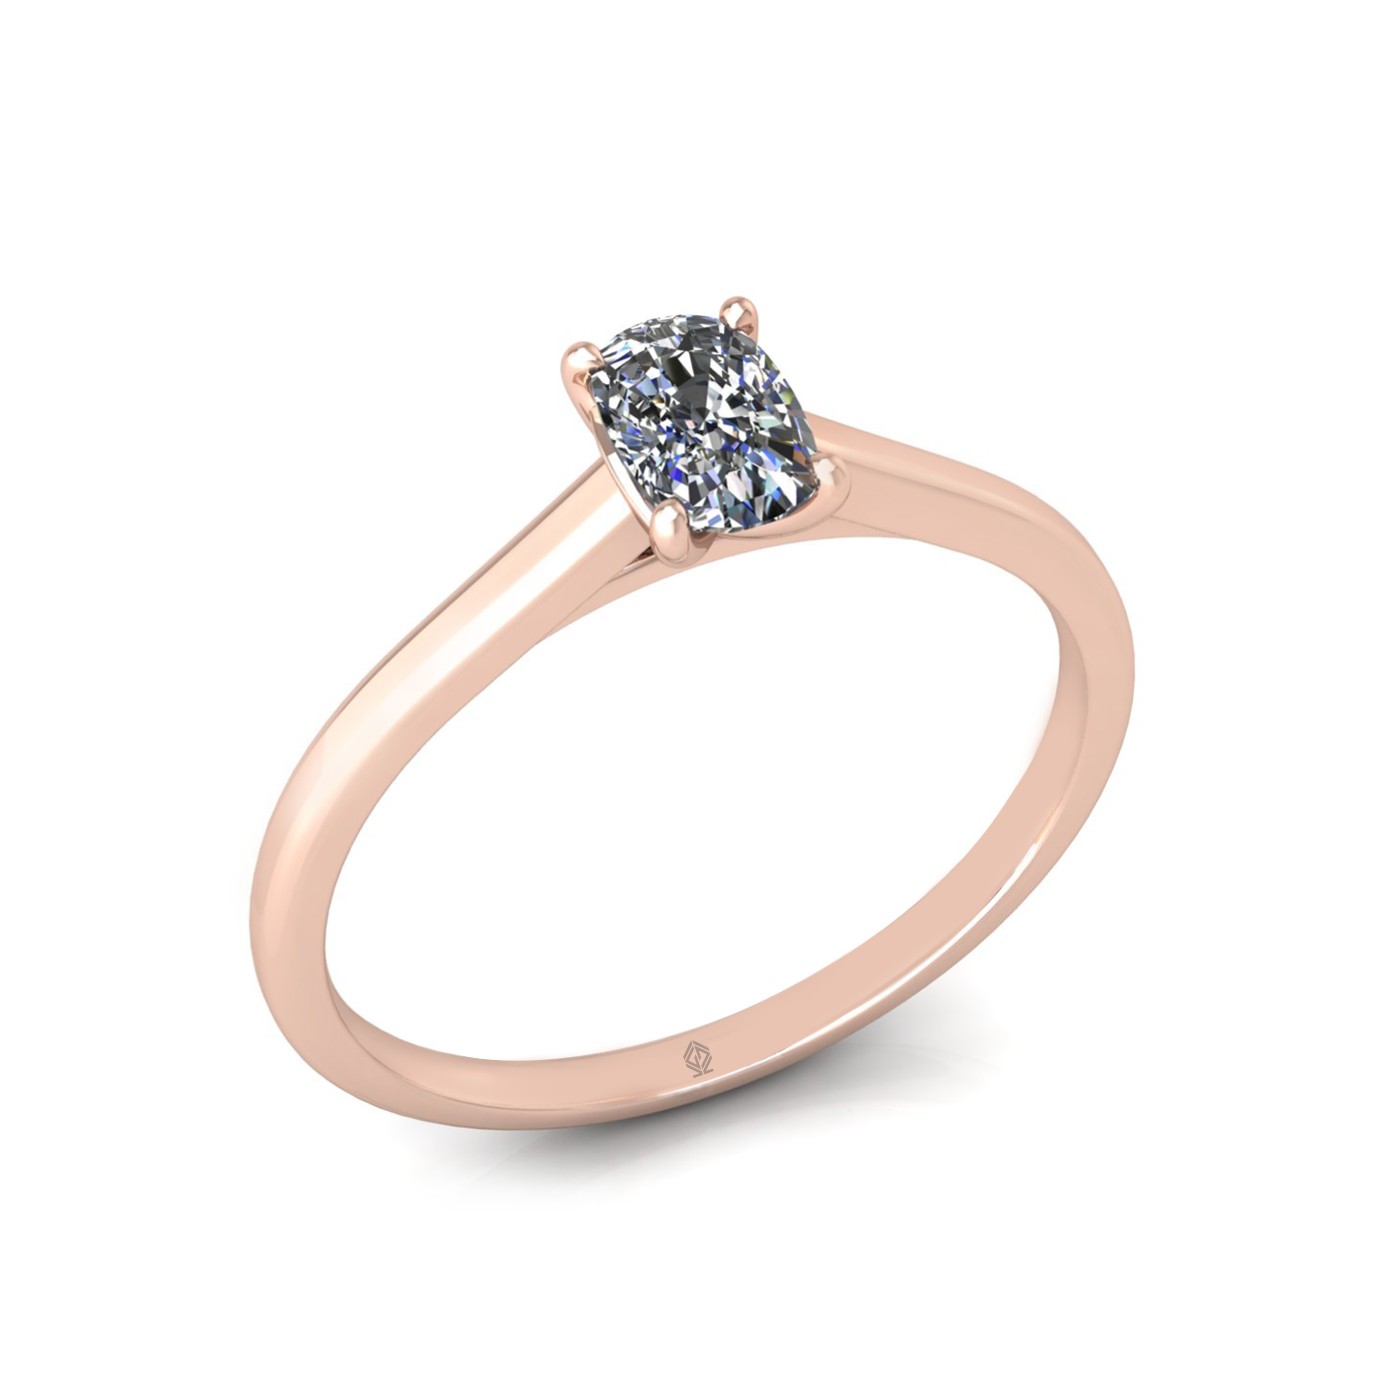 18k rose gold  0,50 ct 4 prongs solitaire elongated cushion cut diamond engagement ring with whisper thin band